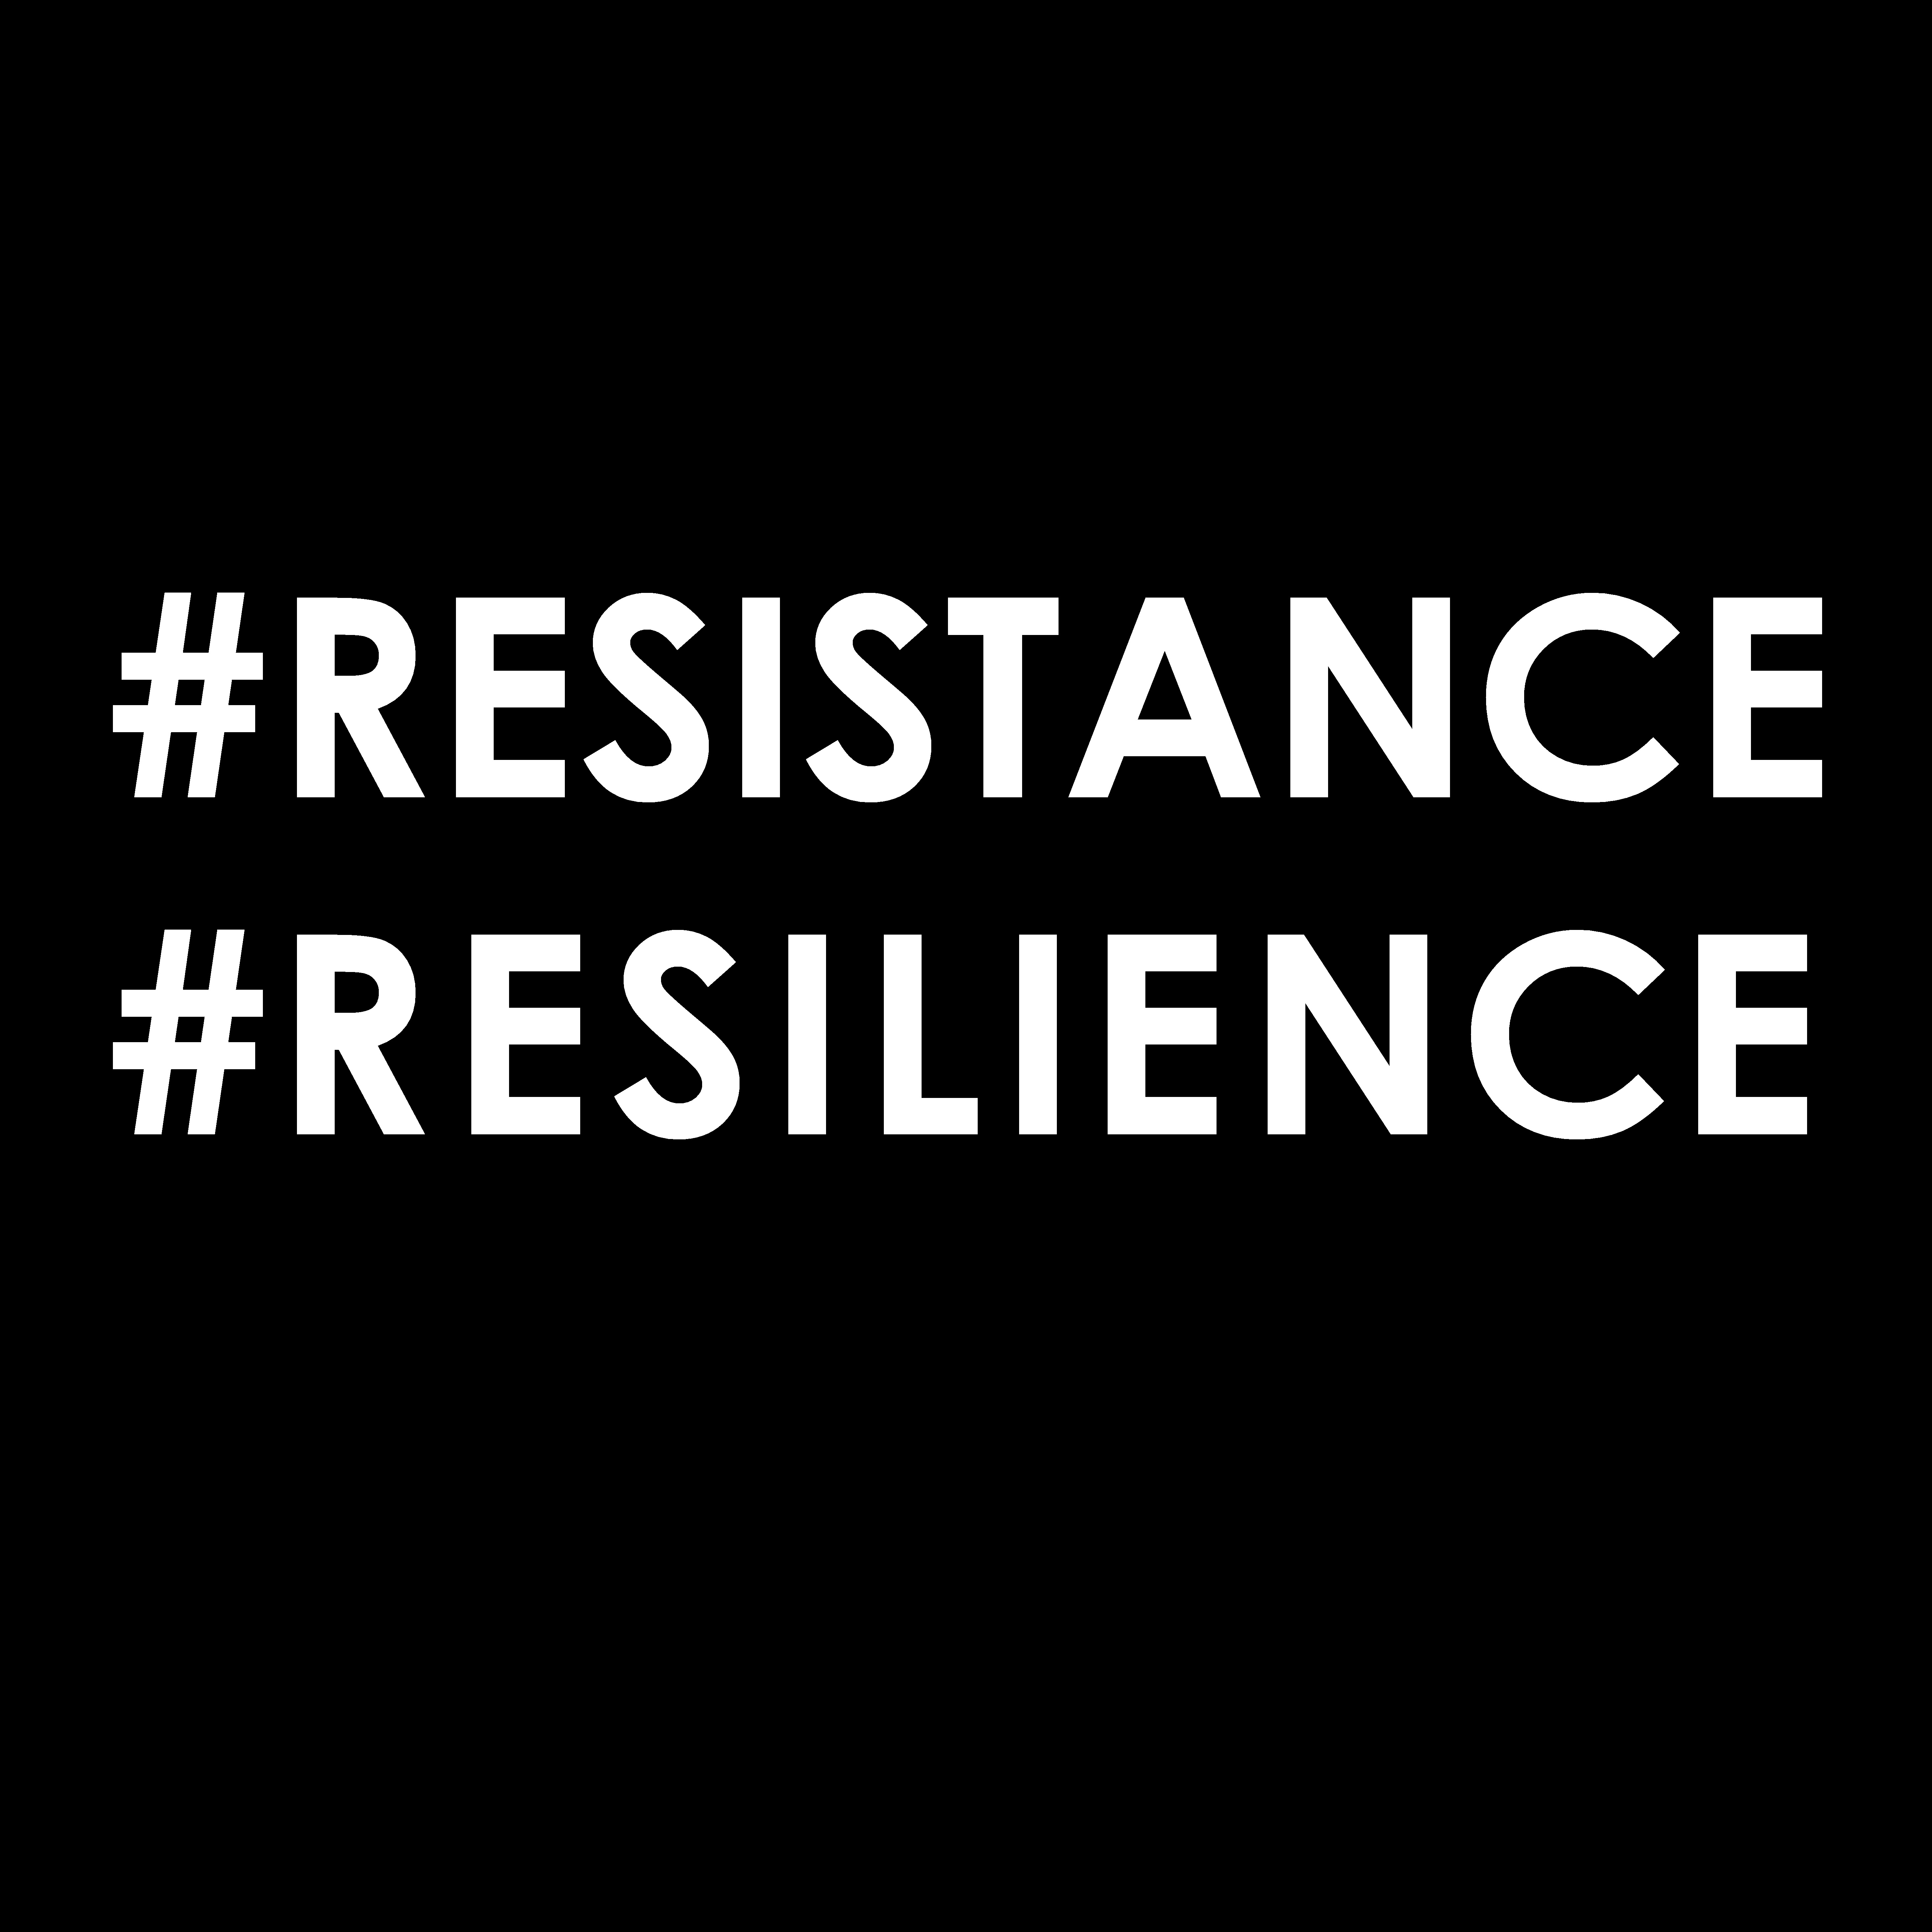 #RESISTANCE #RESILIENCE [06/08/17]